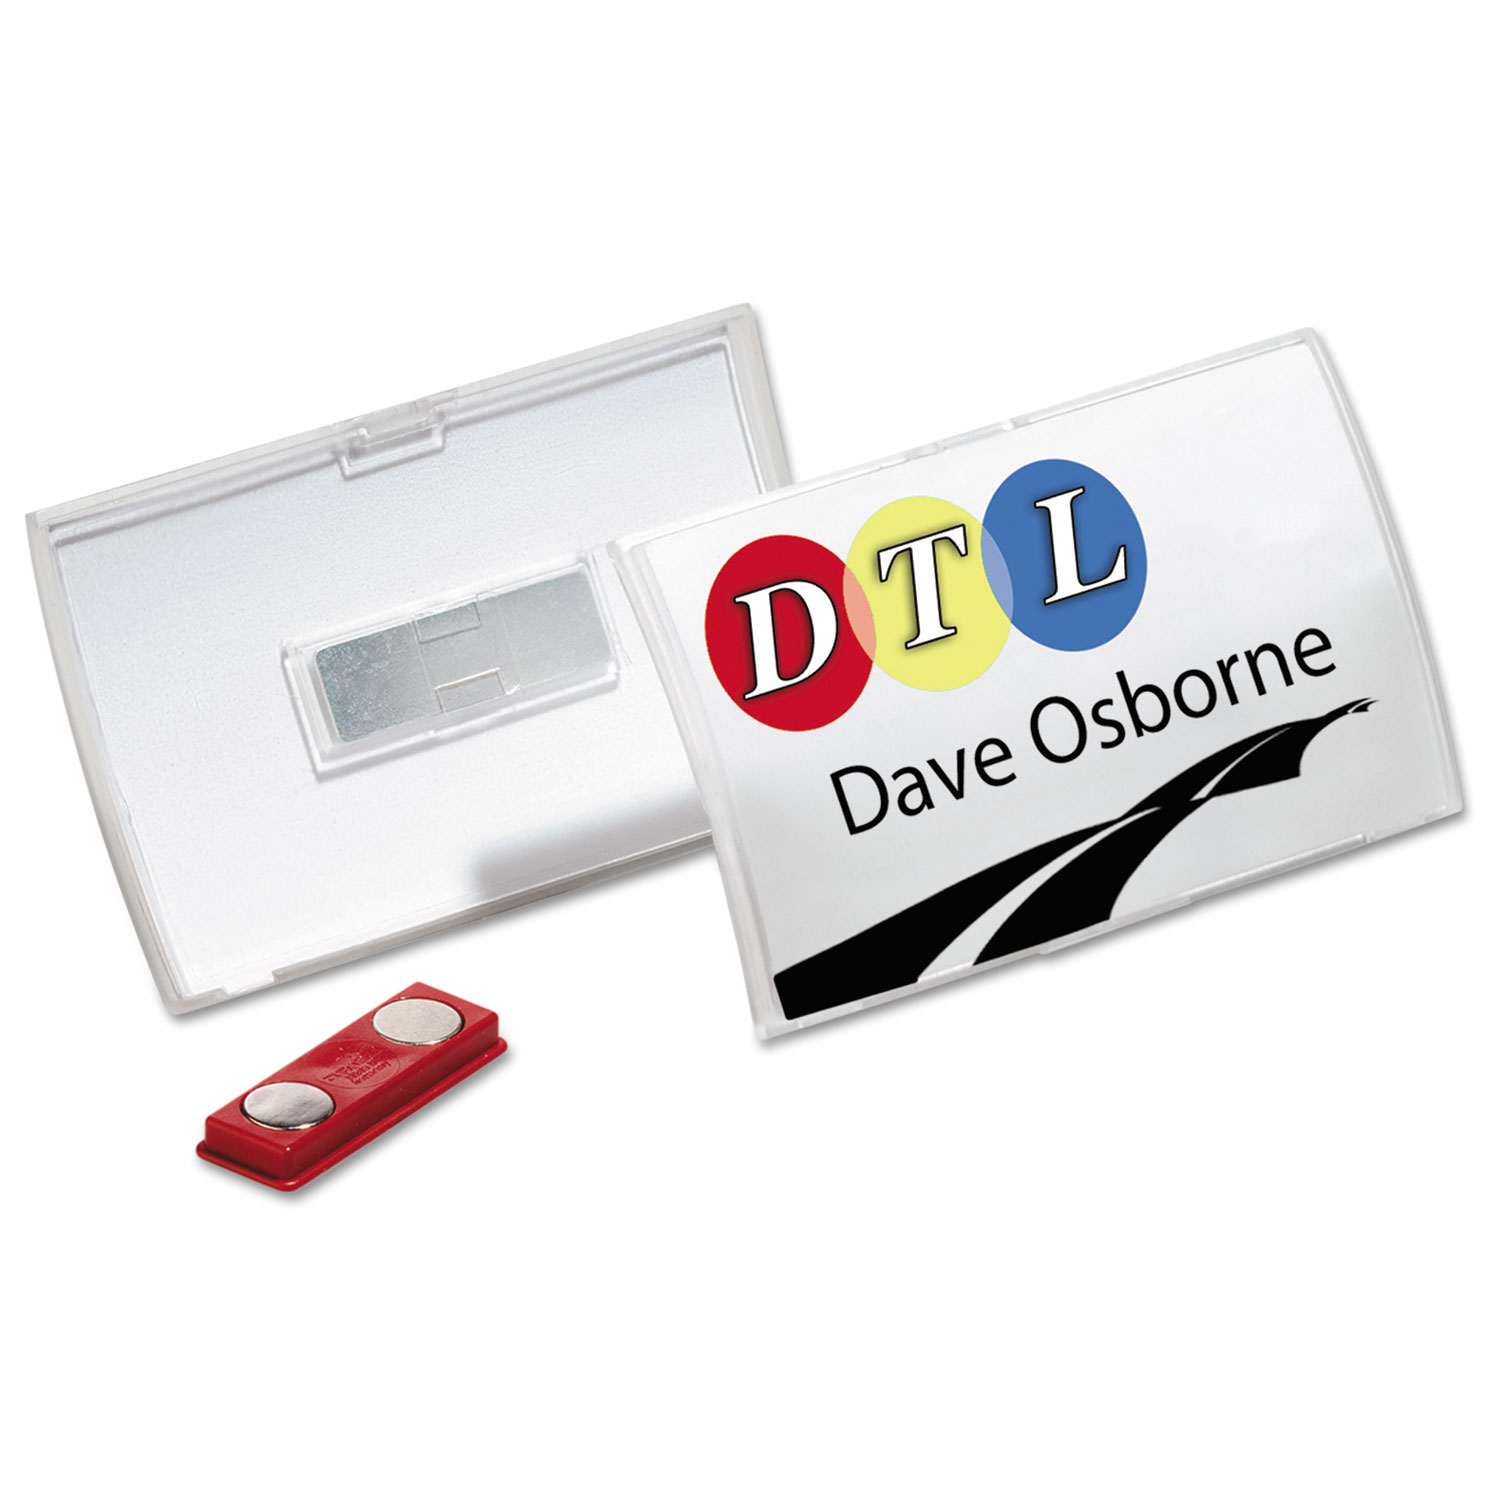  Durable 821519 Click-Fold Convex Name Badge Holder, Double Magnets, 3 3/4 x 2 1/4, Clear, 10/Pk (DBL821519) 